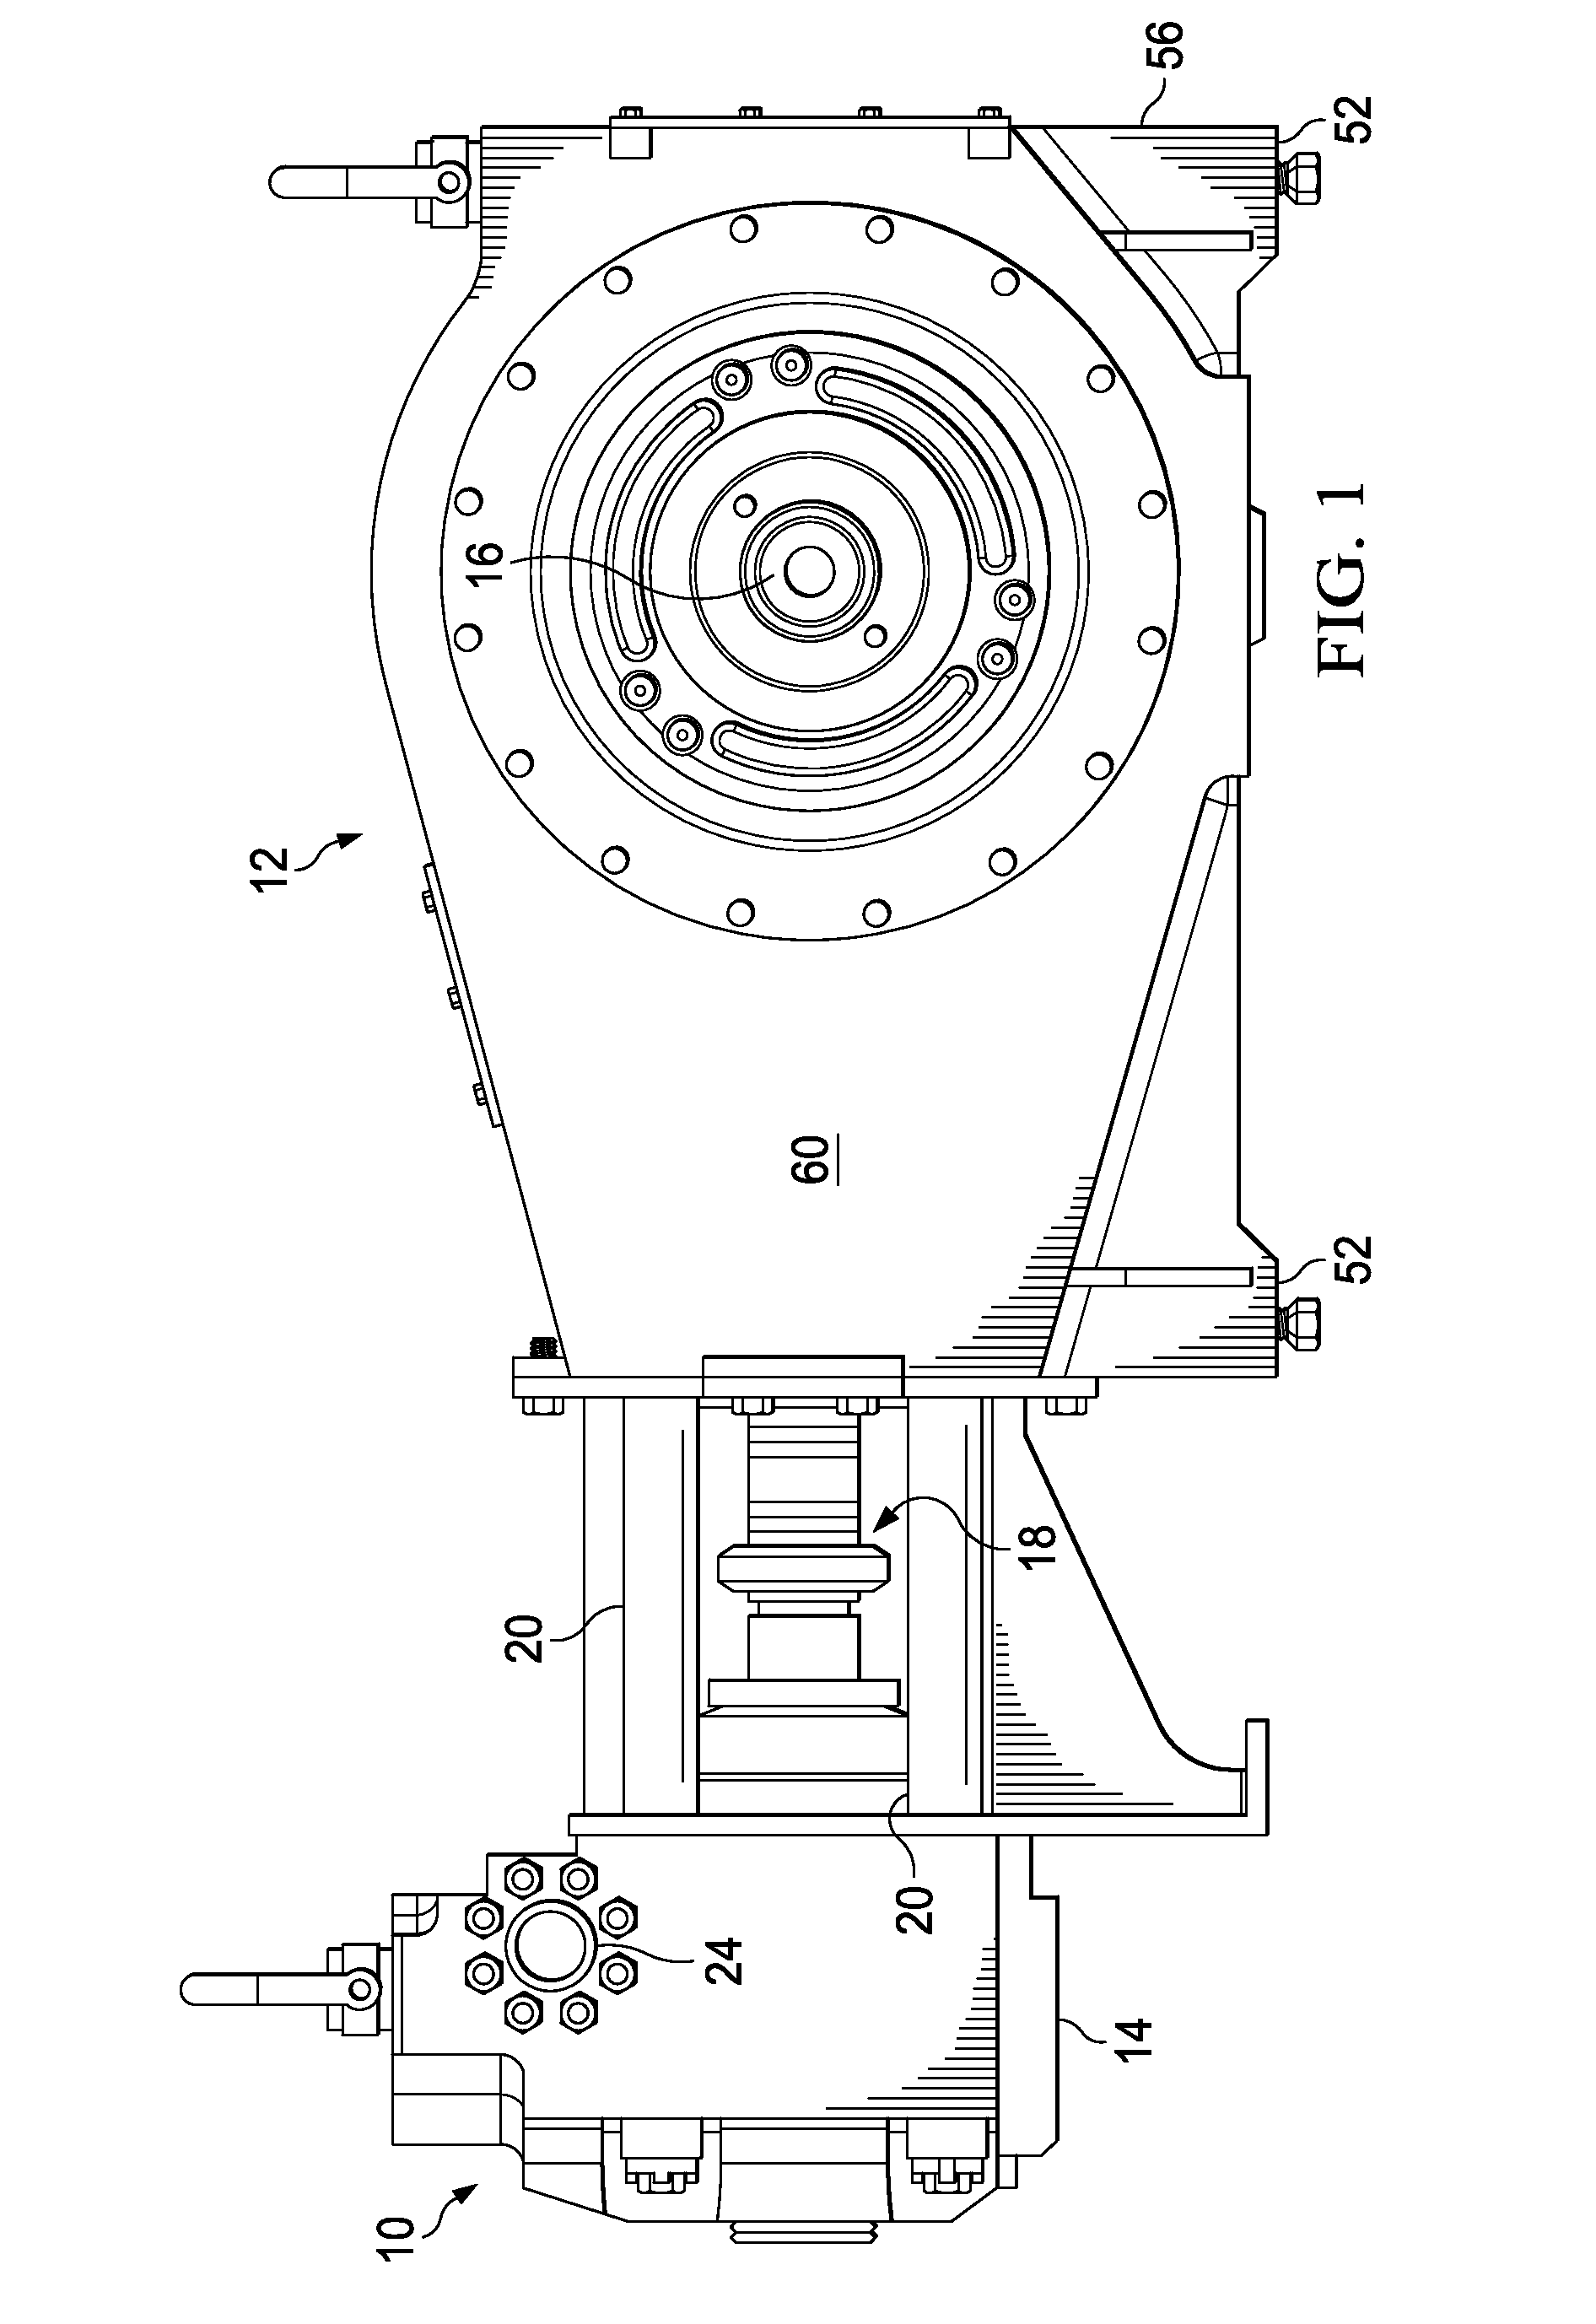 Bearing system for reciprocating pump and method of assembly